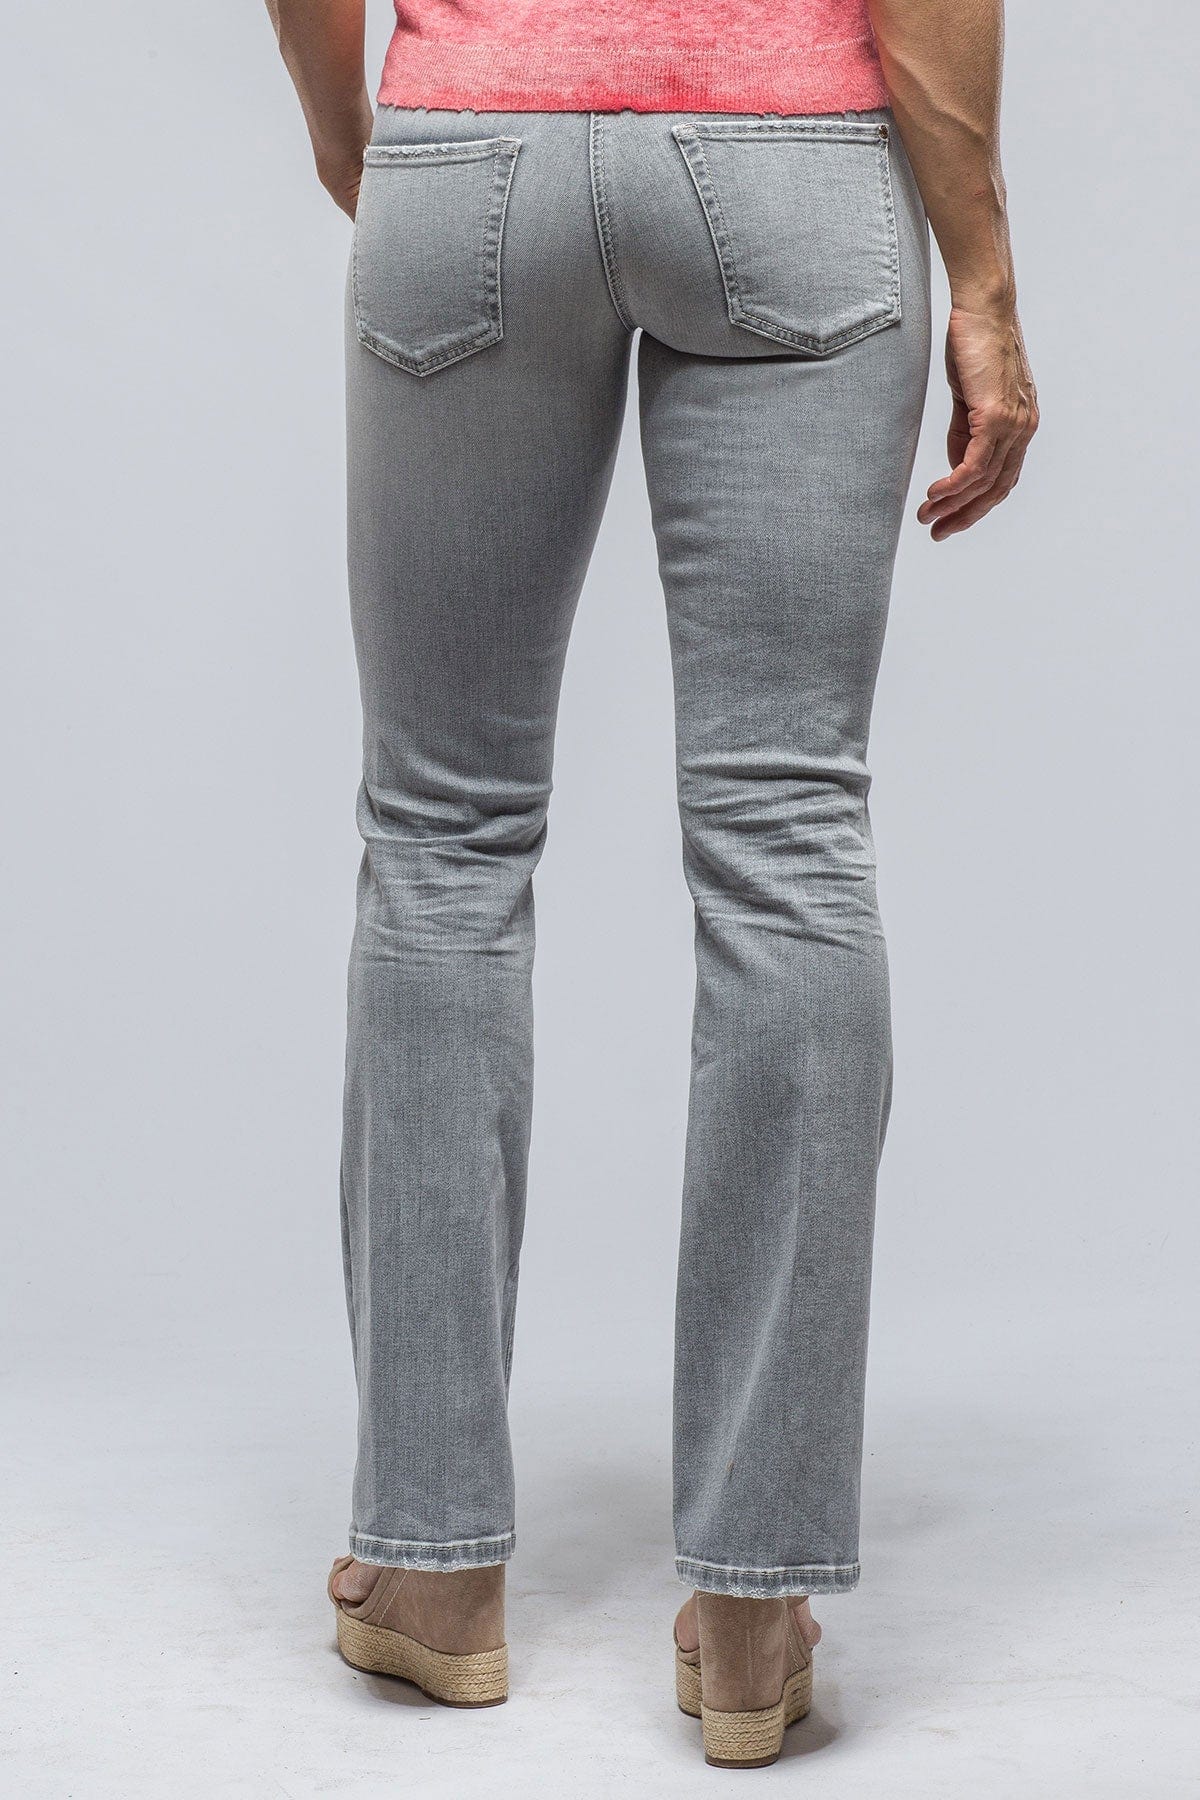 Paris Flared Jeans In Washed Grey - AXEL'S